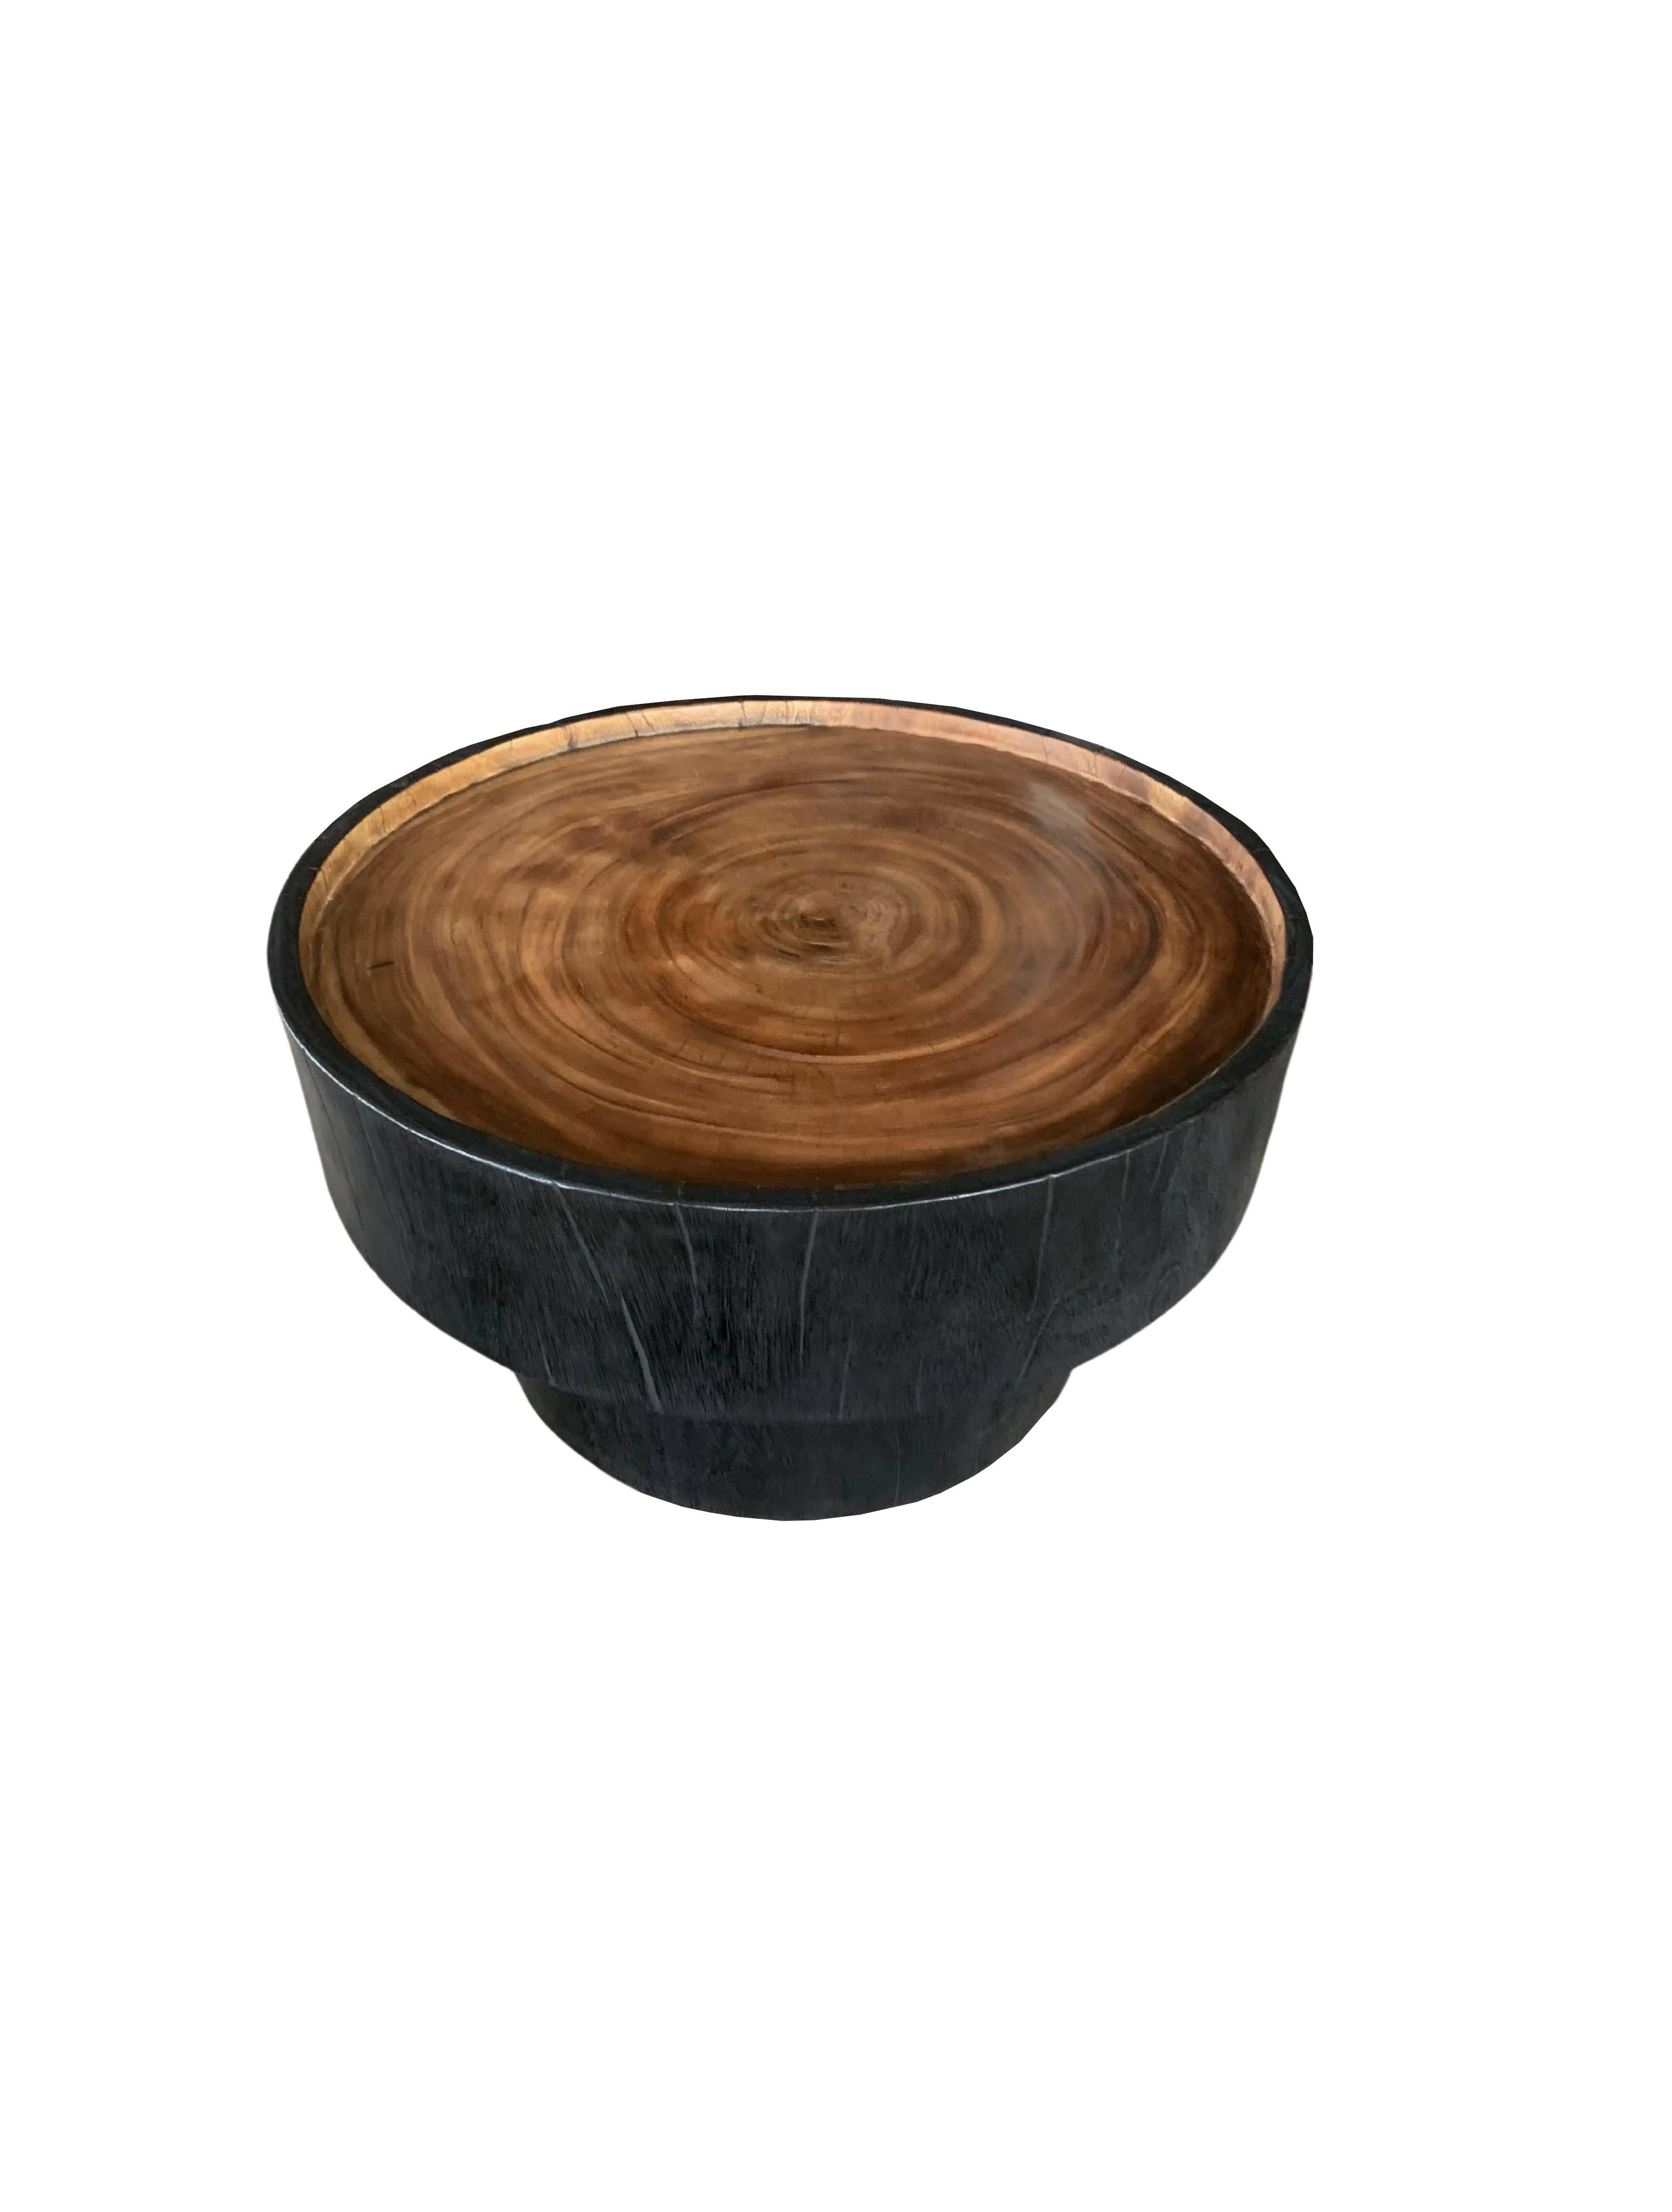 Hand-Crafted Sculptural Round Table Crafted from Solid Mango Wood For Sale